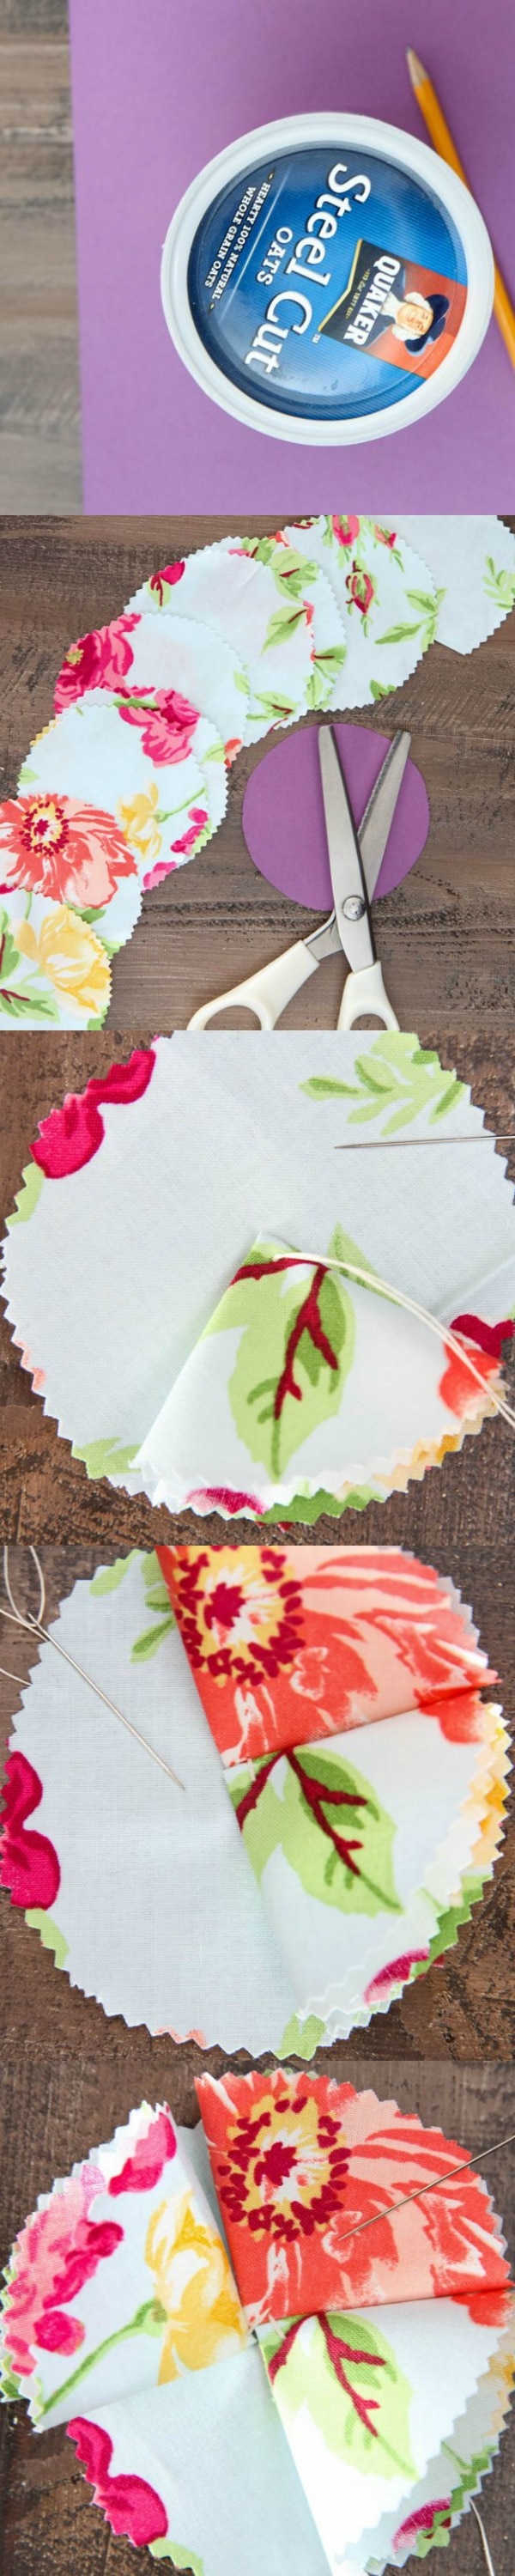 How to Make Fabric Flowers from MomAdvice.com